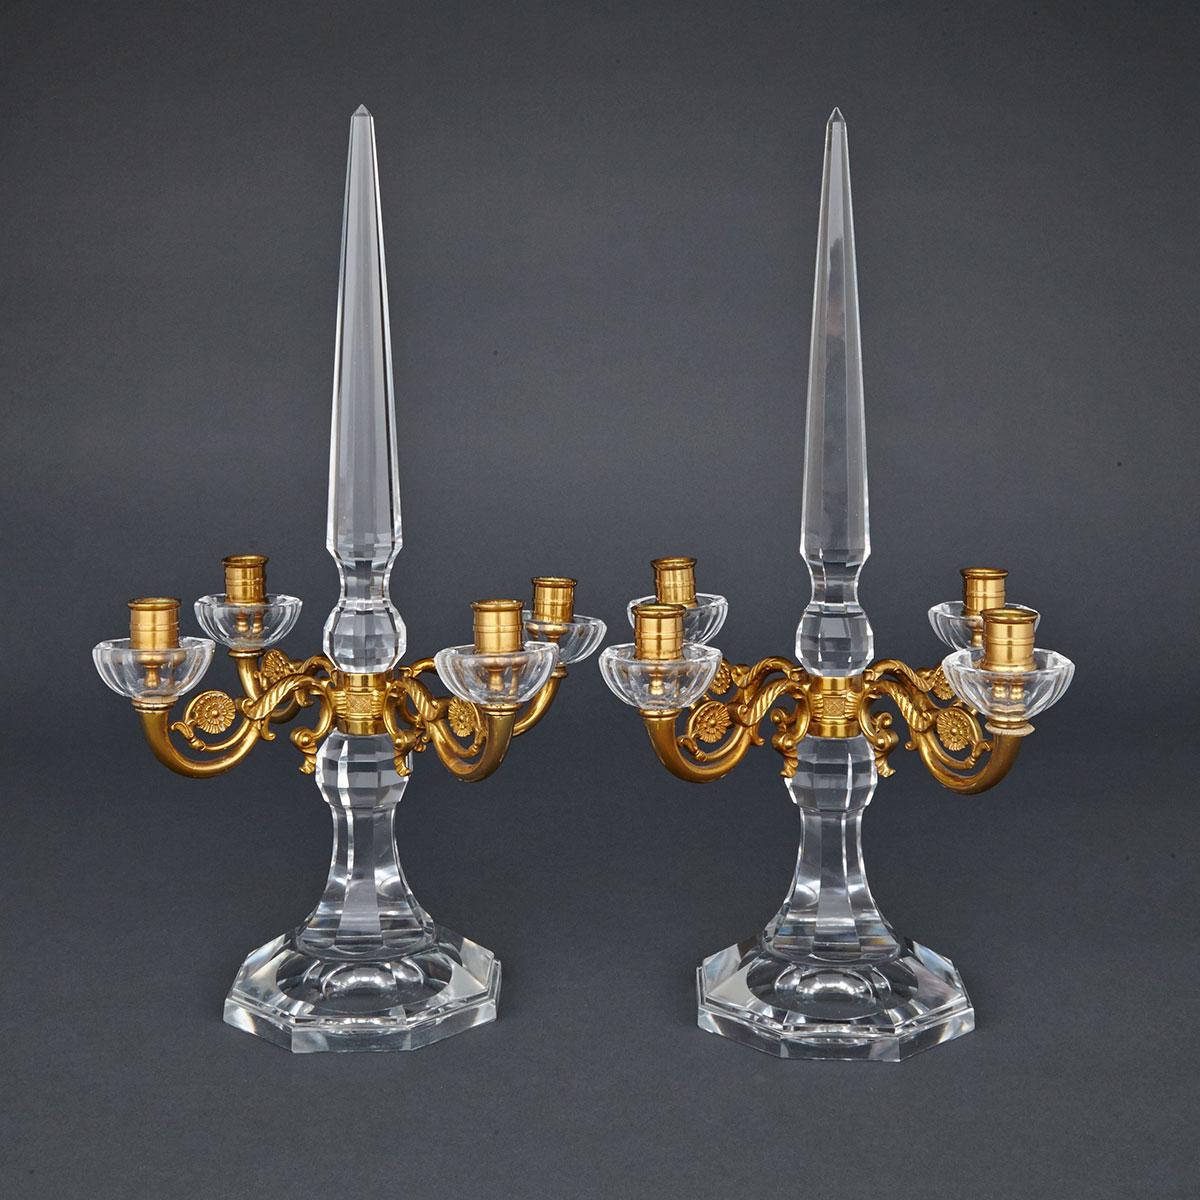 Pair of French Cut Glass and Gilt Brass Four-Light Candelabra, 20th century